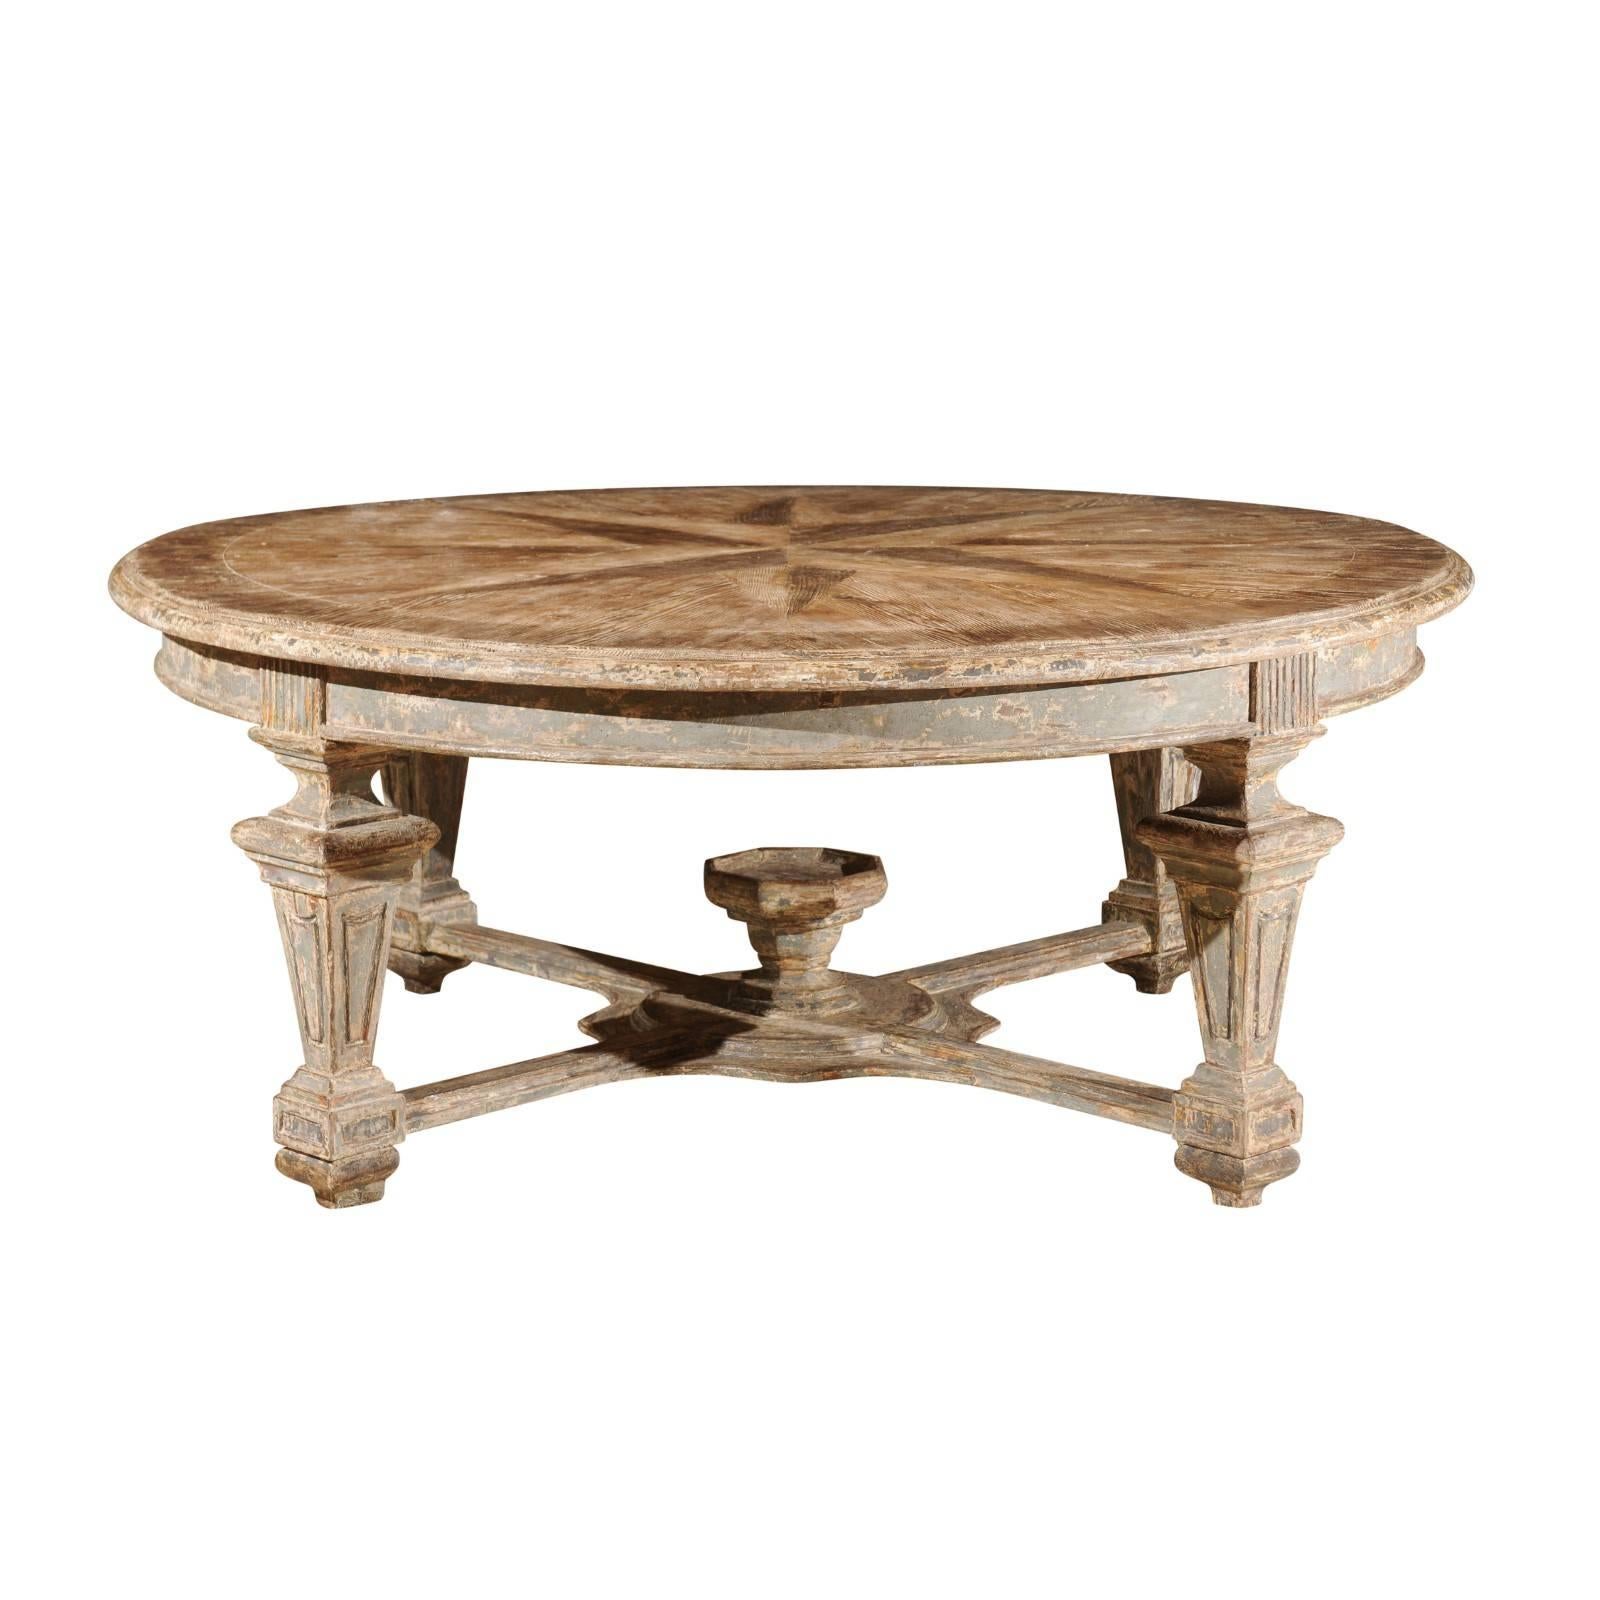 Neoclassical Style Italian Painted Round Dining Table with Column Legs and Inlay